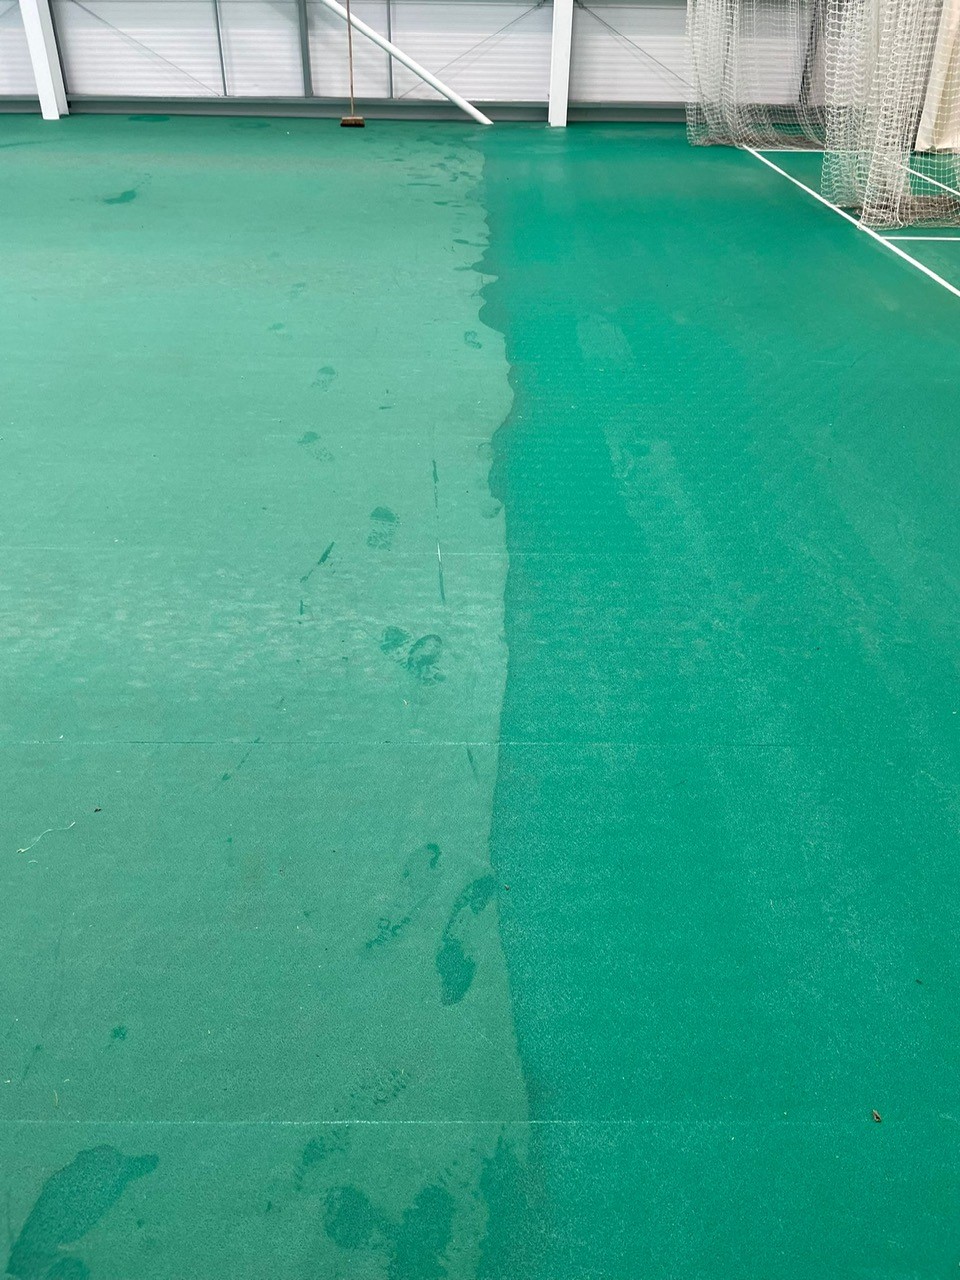 SSUK recently performed an industrial mechanical deep clean at Ealing Trailfinders Cricket Club, to strip the surface of dirt and contaminants, bringing it back to as good as new!